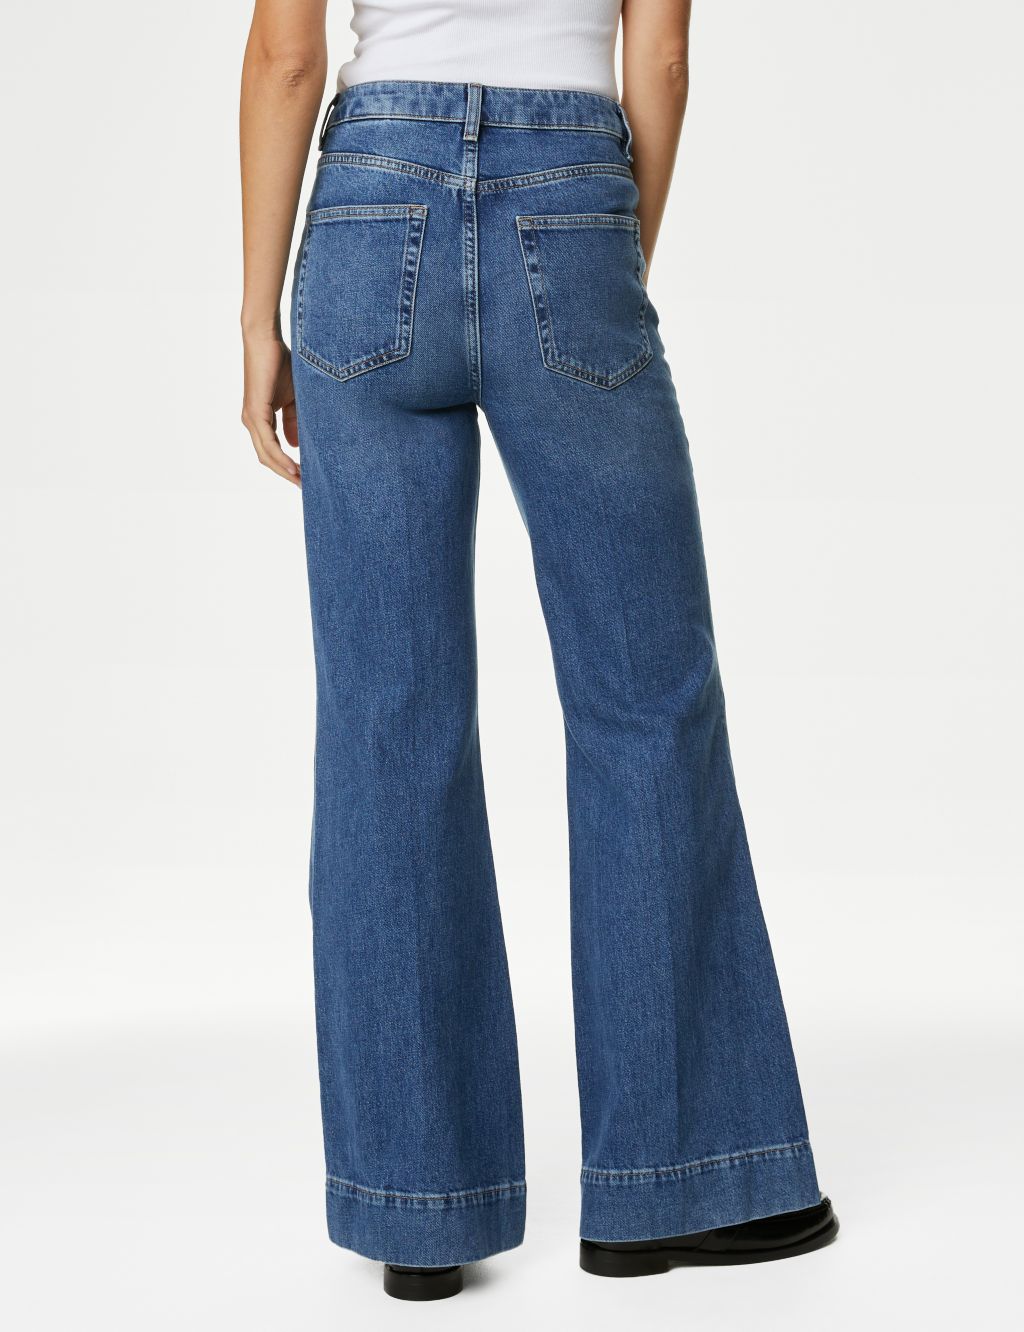 Patch Pocket Flare High Waisted Jeans image 4